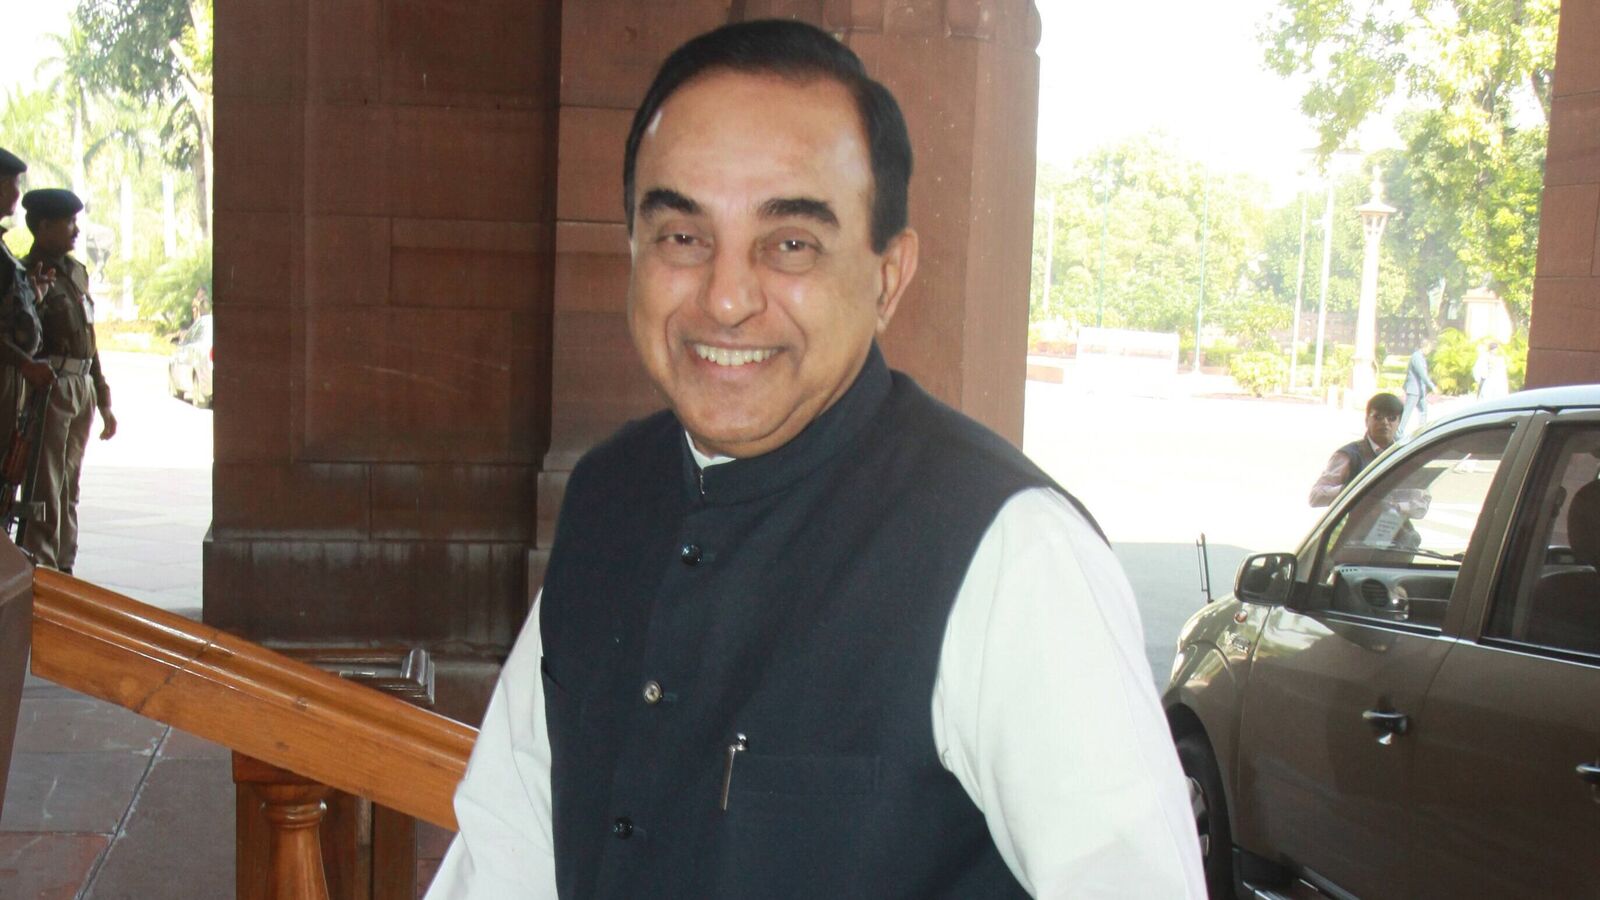 'I support voters refusing to vote for Modi...': Subramanian Swamy says PM 'allowed China' to grab land in Ladakh